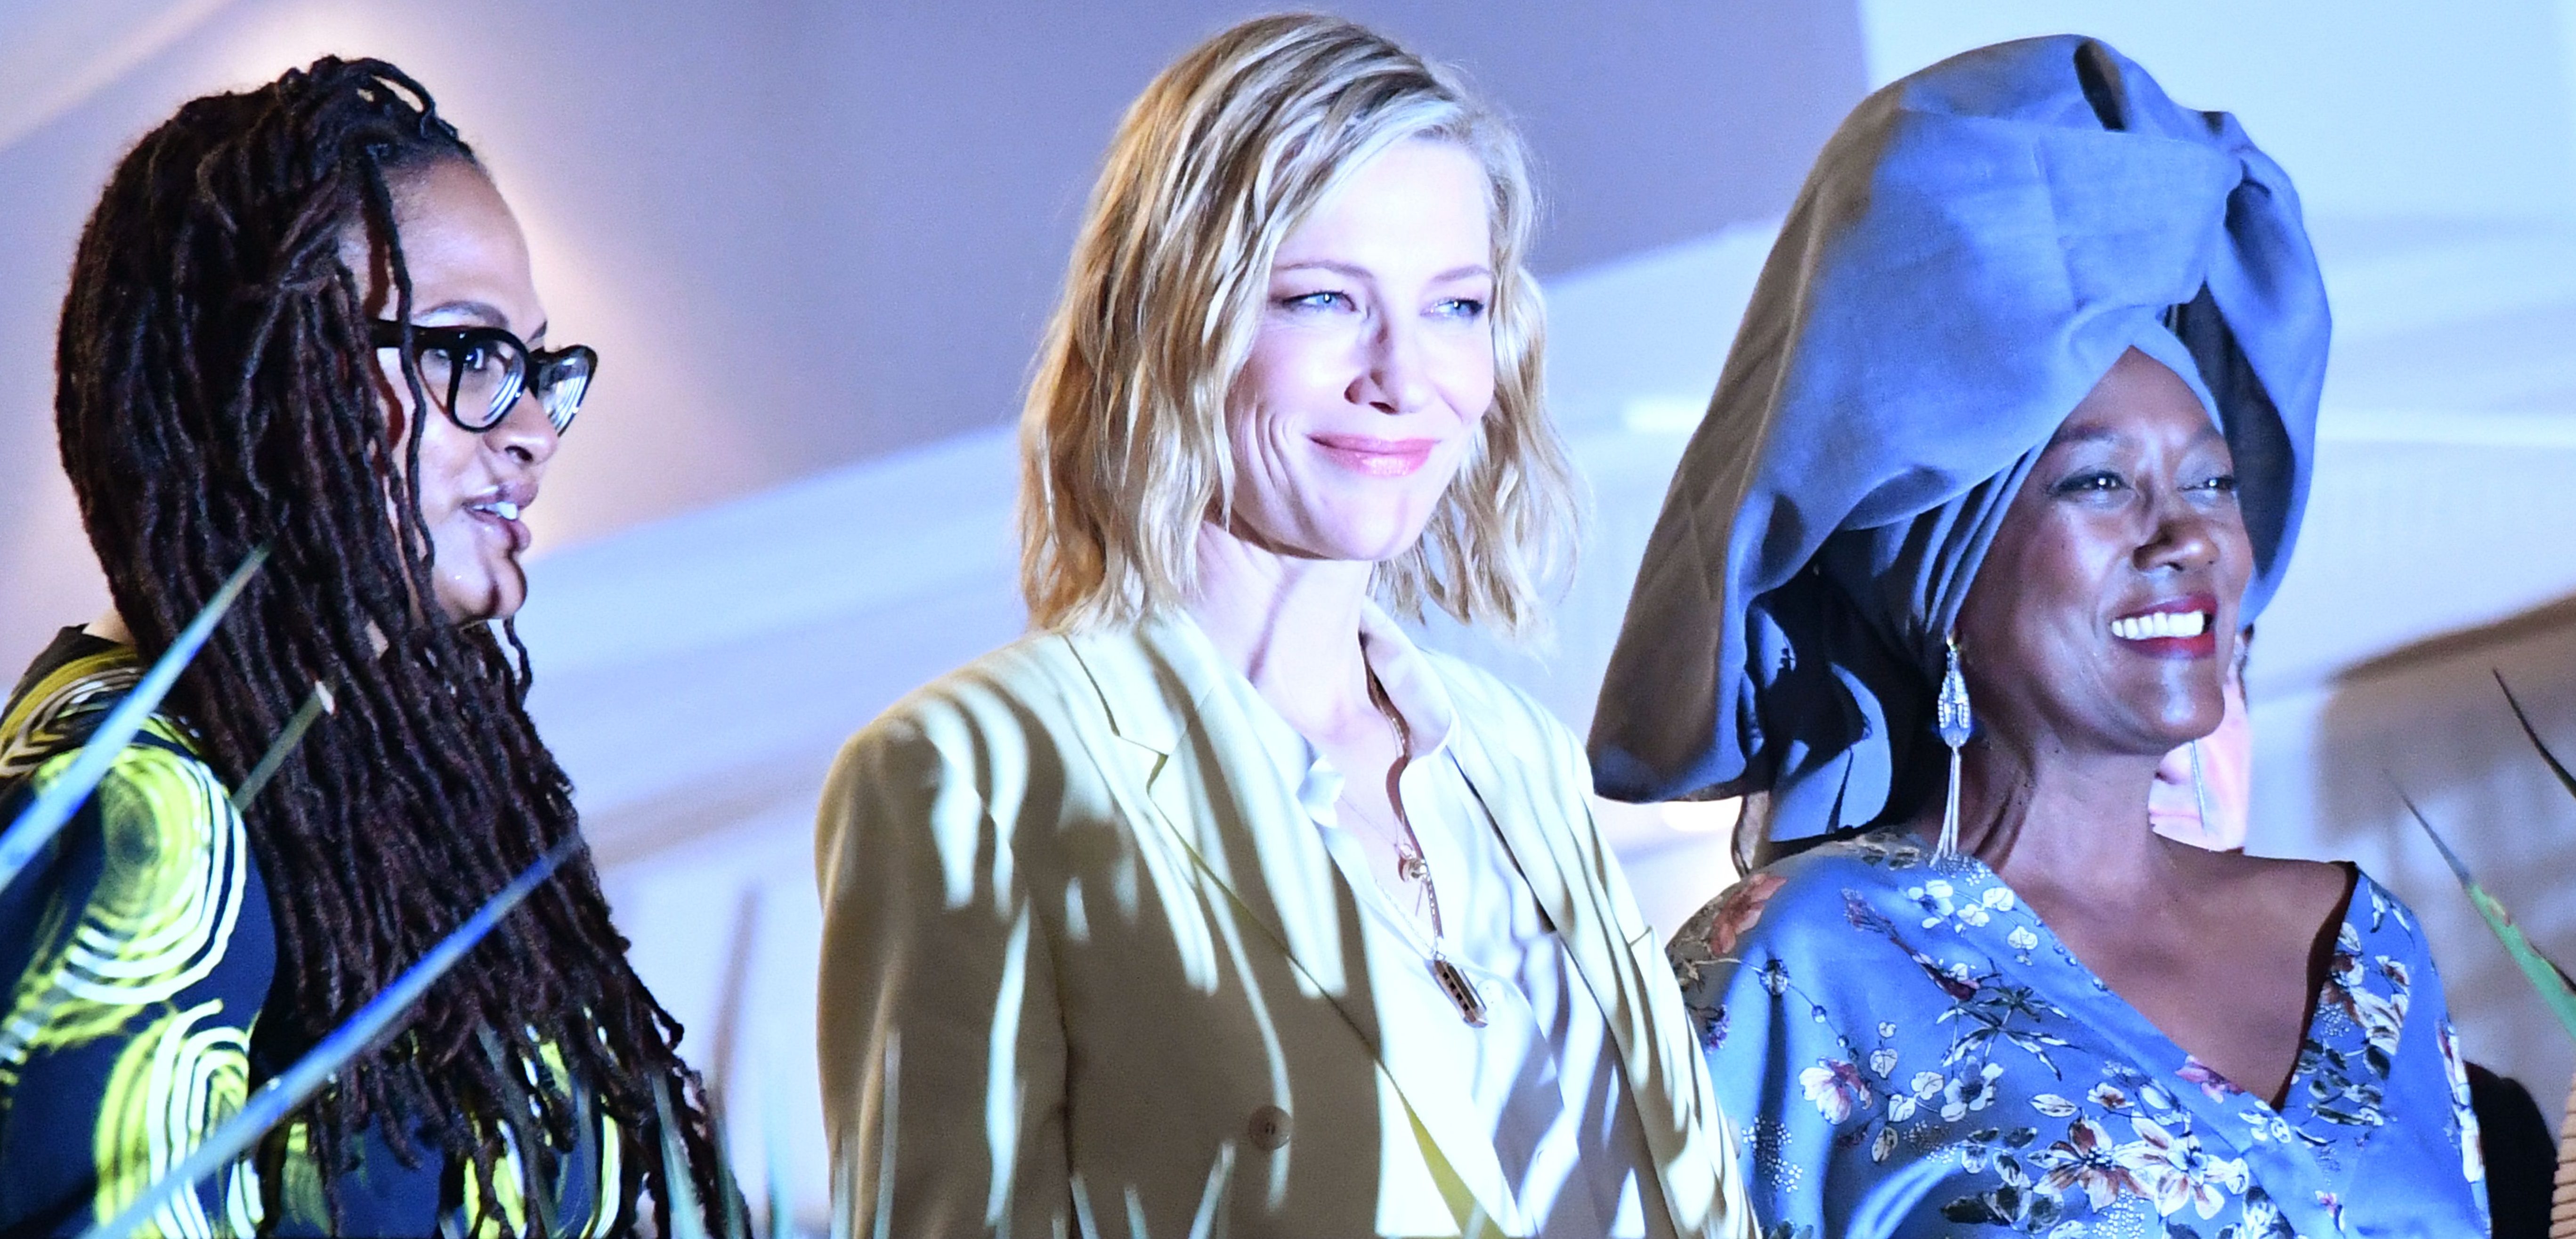 Cate Blanchett attends the Jury Dinner in Cannes